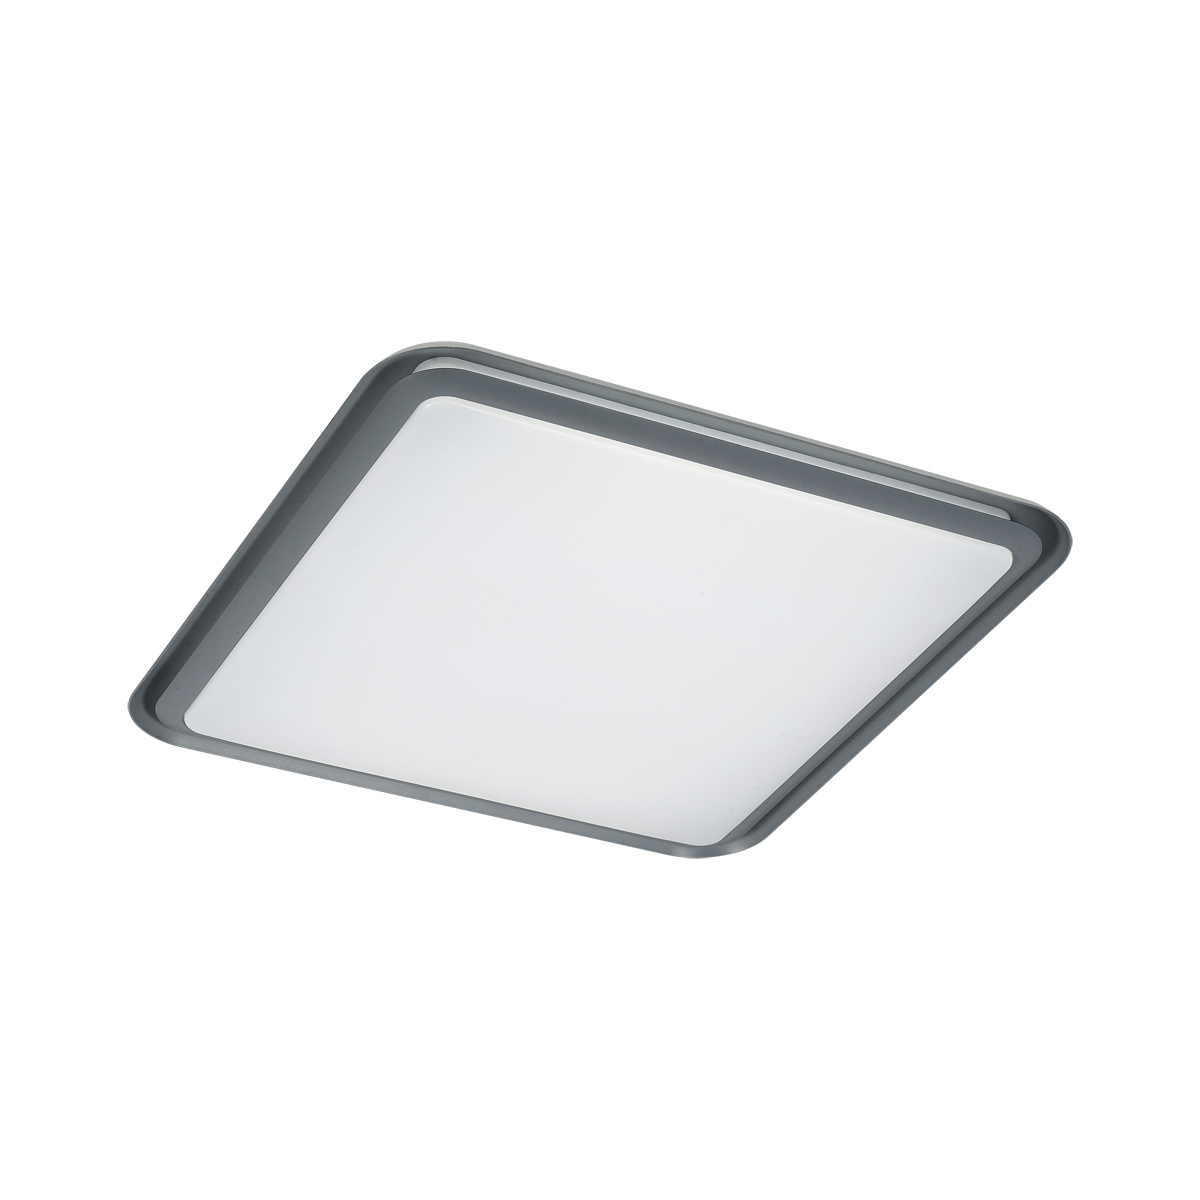 huayi,GD0395,square ceiling lamp